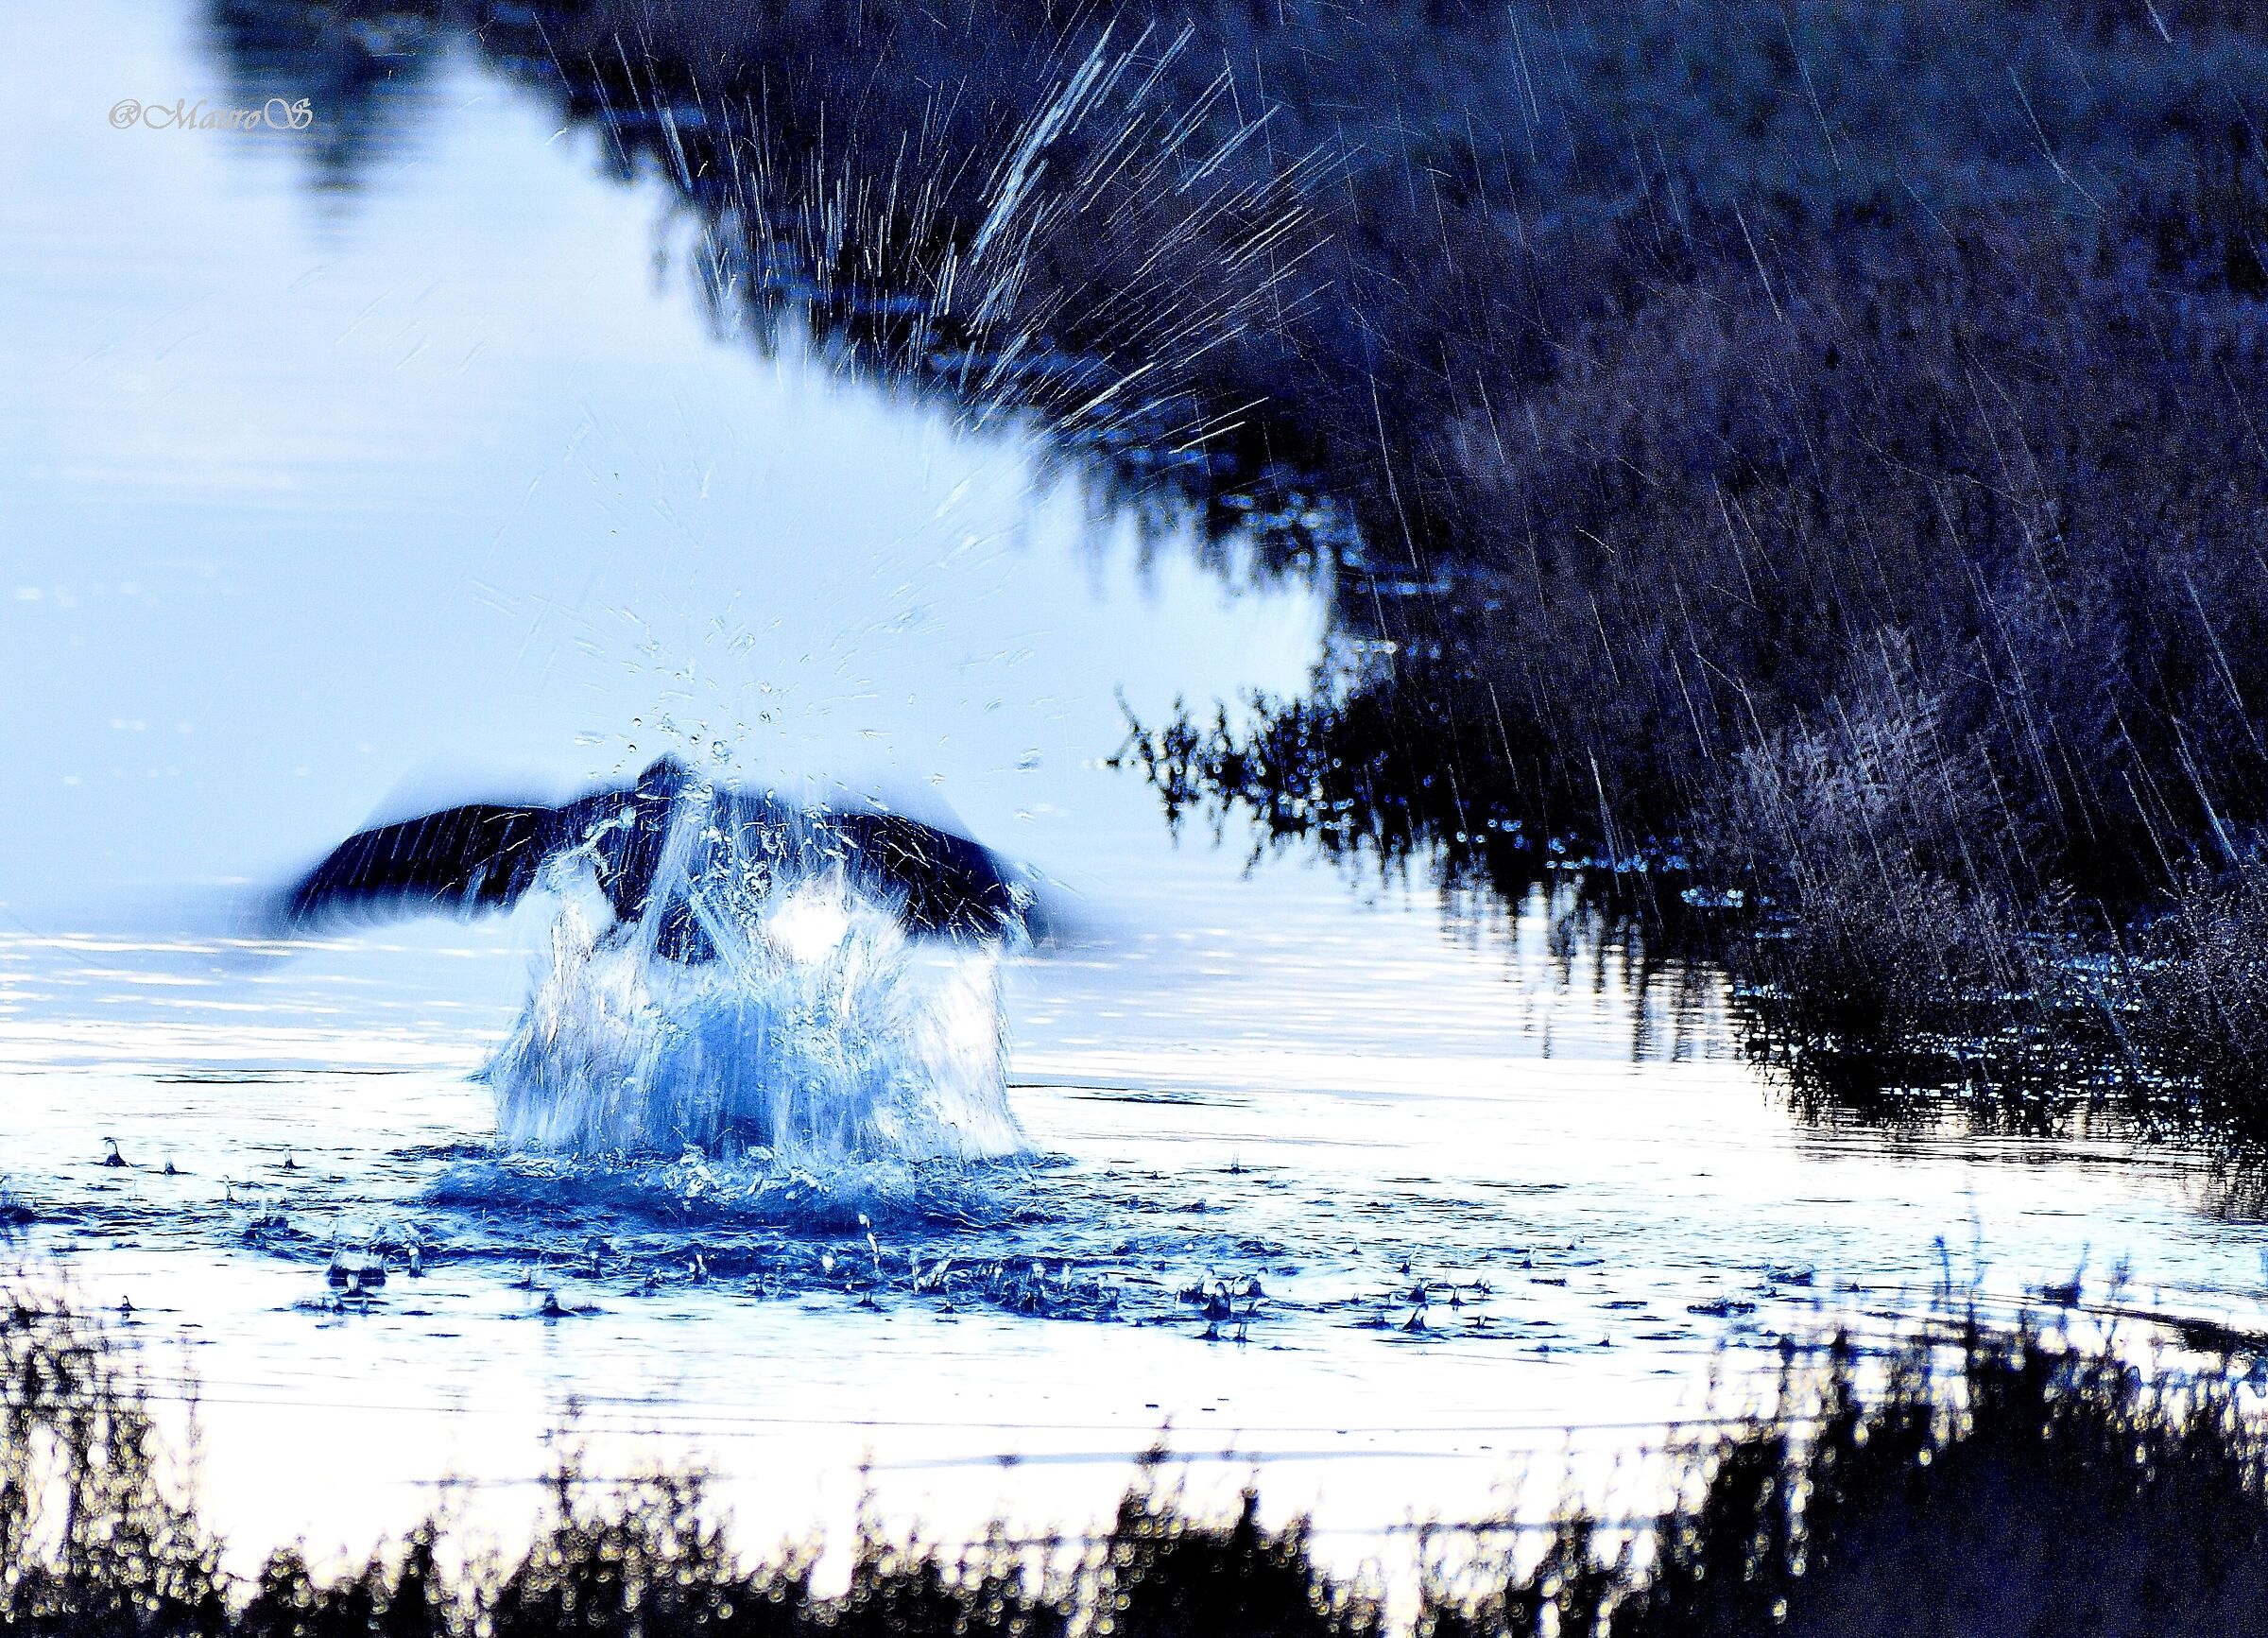 Take-off of a Cormorant (at 1/30)...